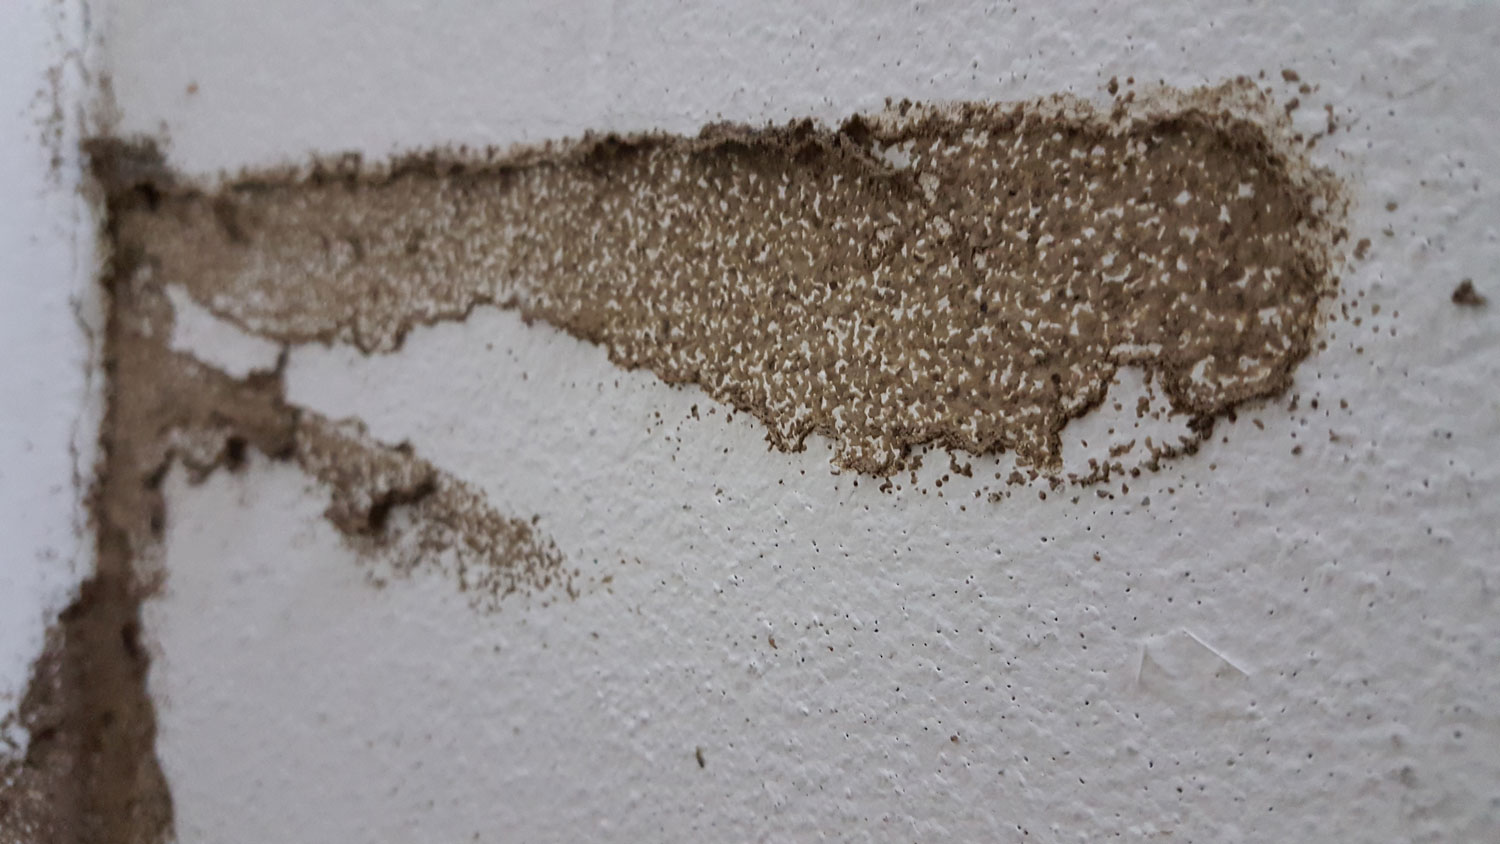 Termite nests on wall